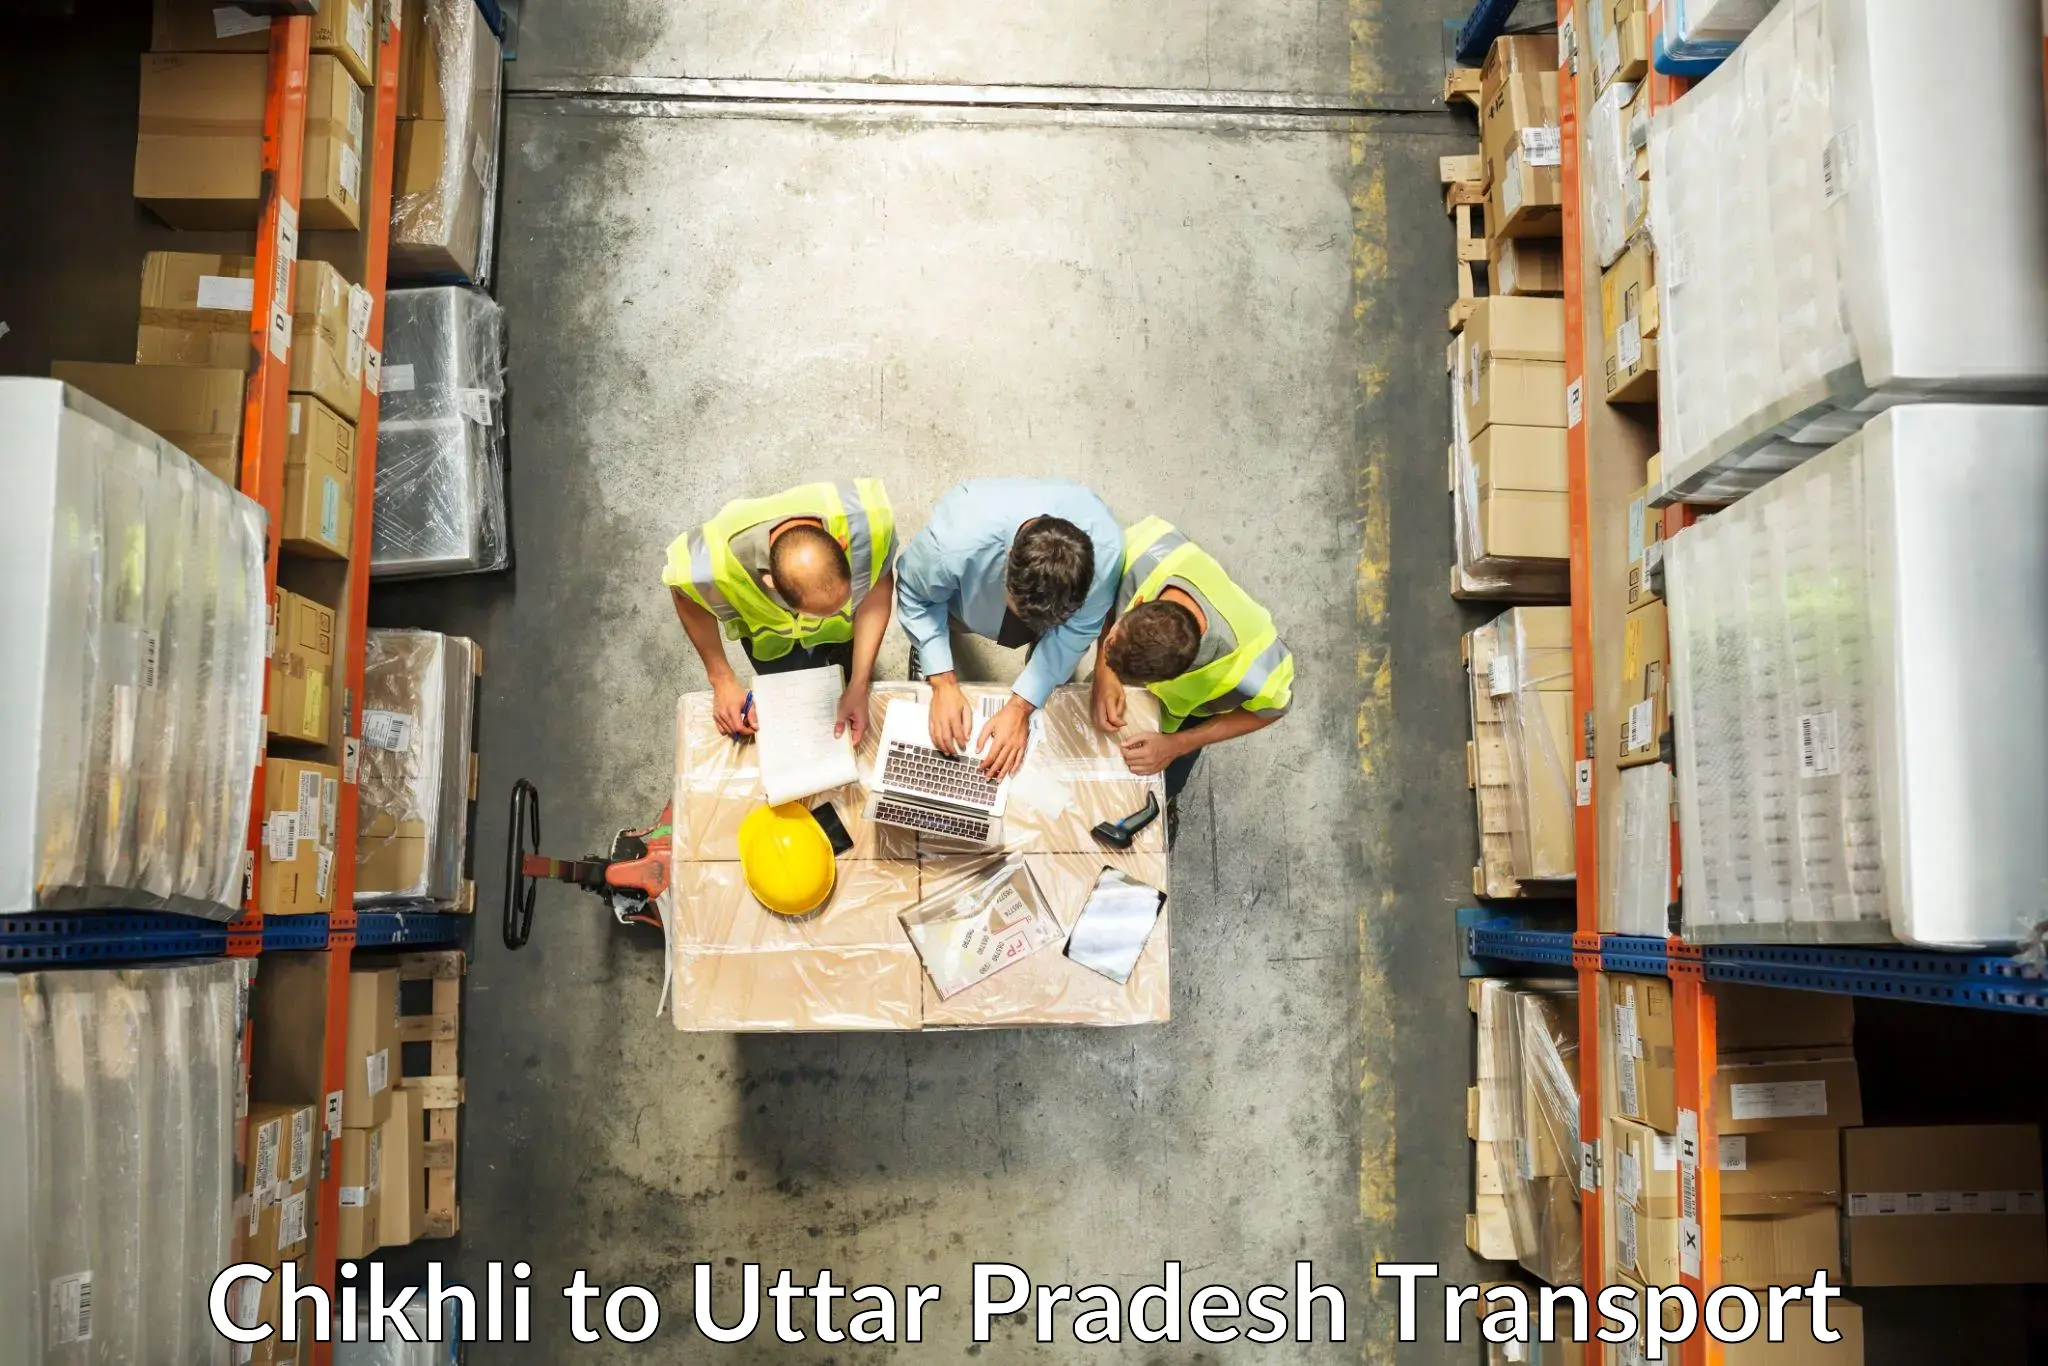 Furniture transport service Chikhli to Ghaziabad